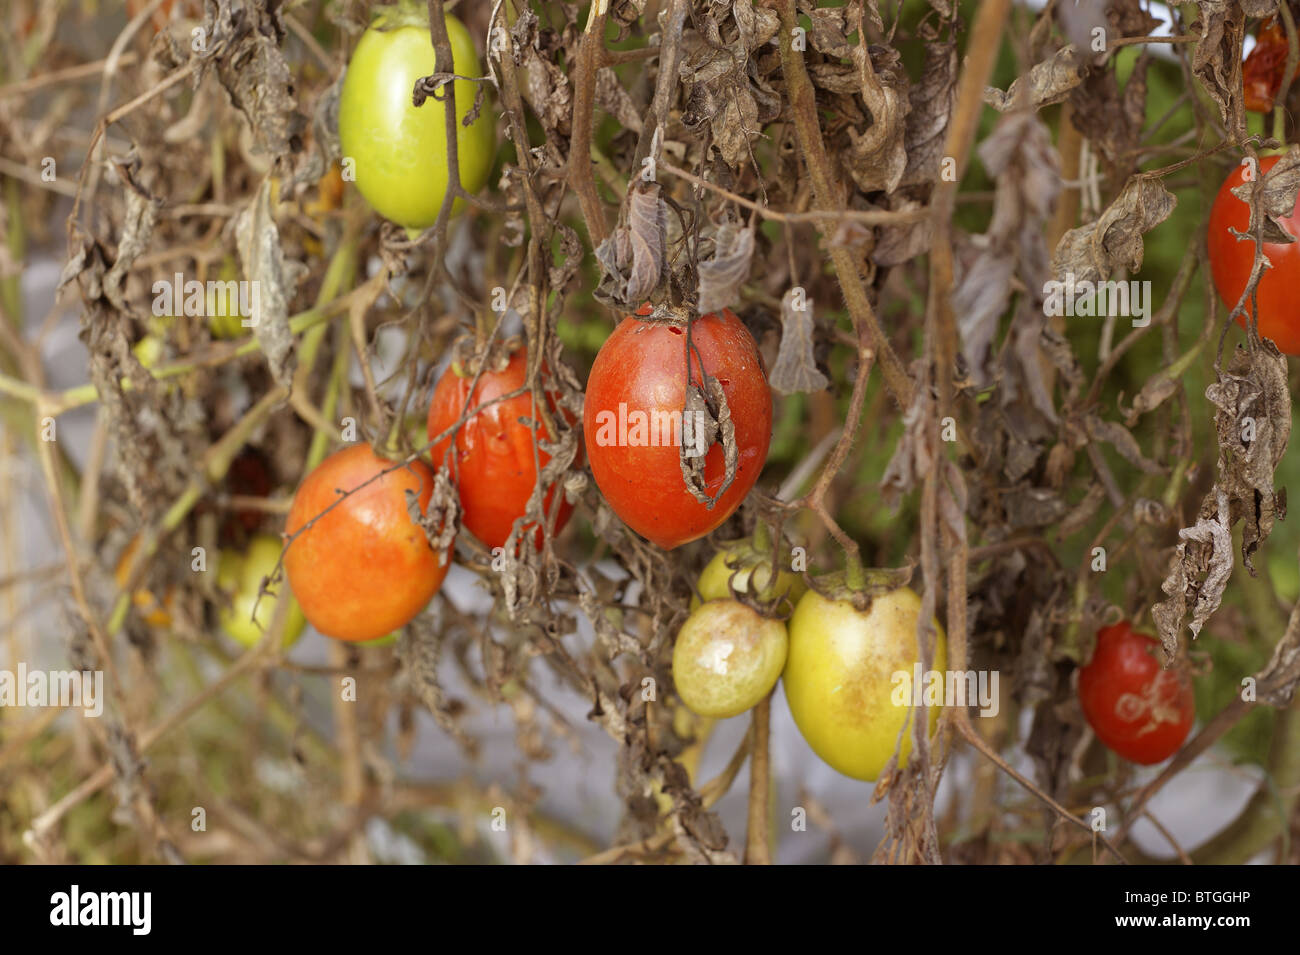 Green & Red Tomatoes With Tomato Blight Stock Photo